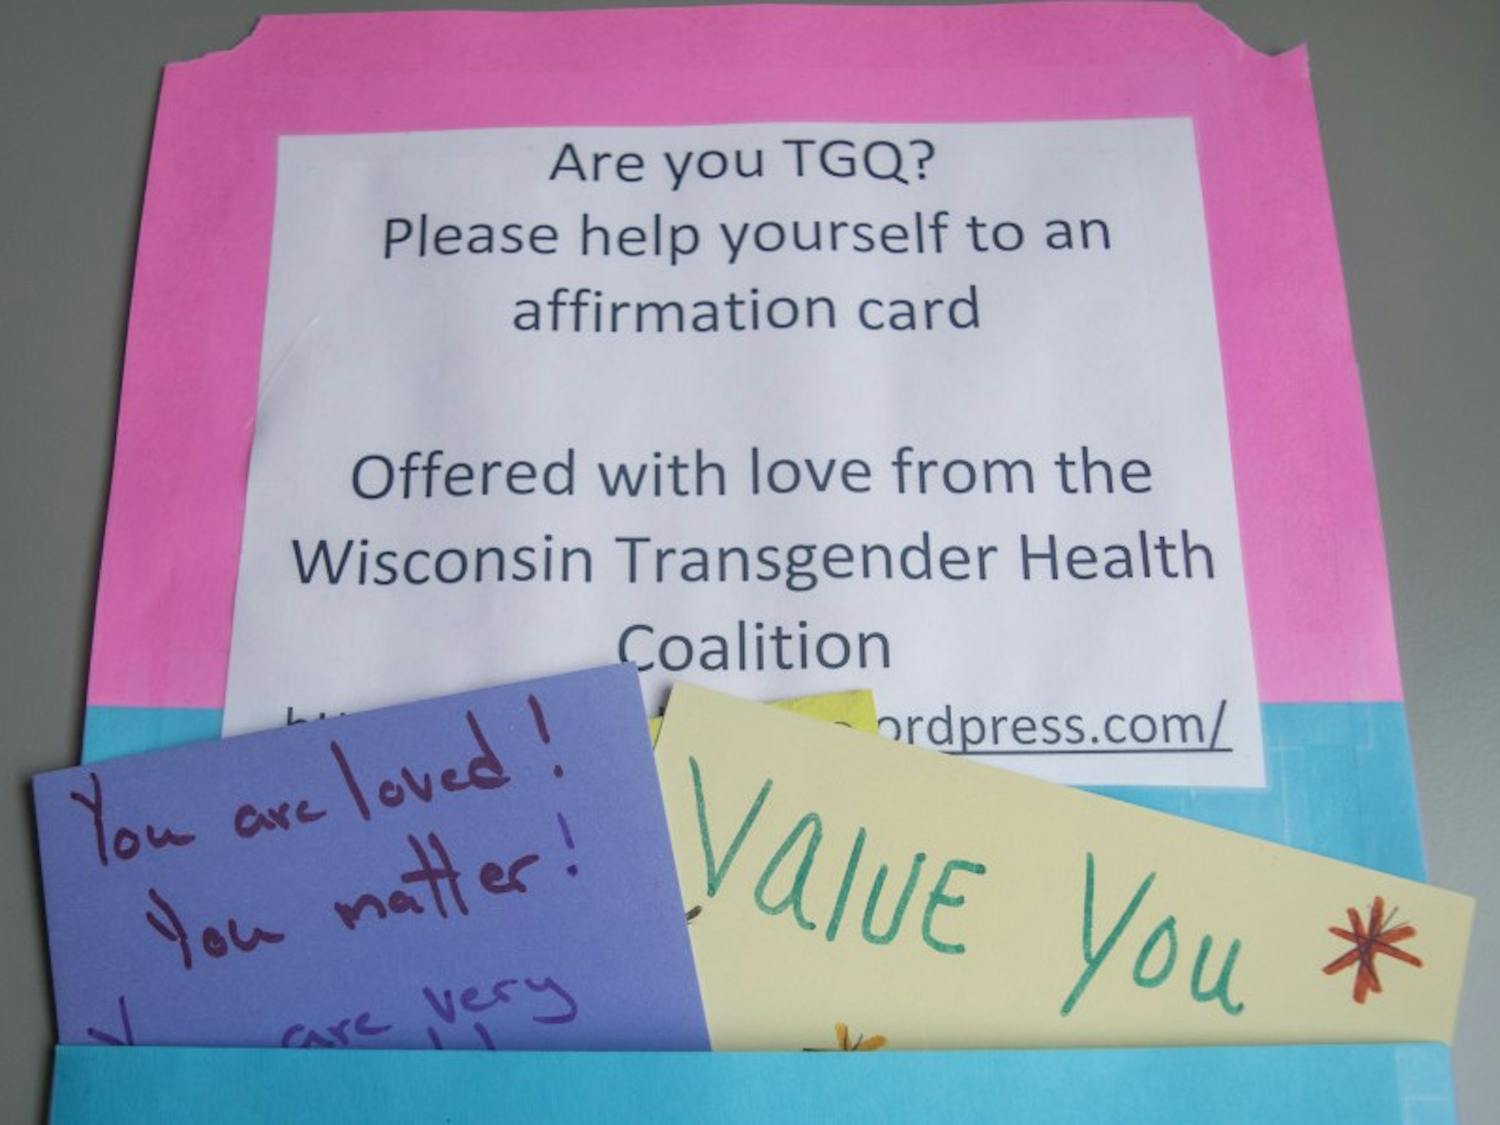 A new University Health Services health model shift allows trans students to go against the stigma of being trans labeled as a mental health condition, which staff said is the best inclusive and affirmative practice of trans health care.&nbsp;